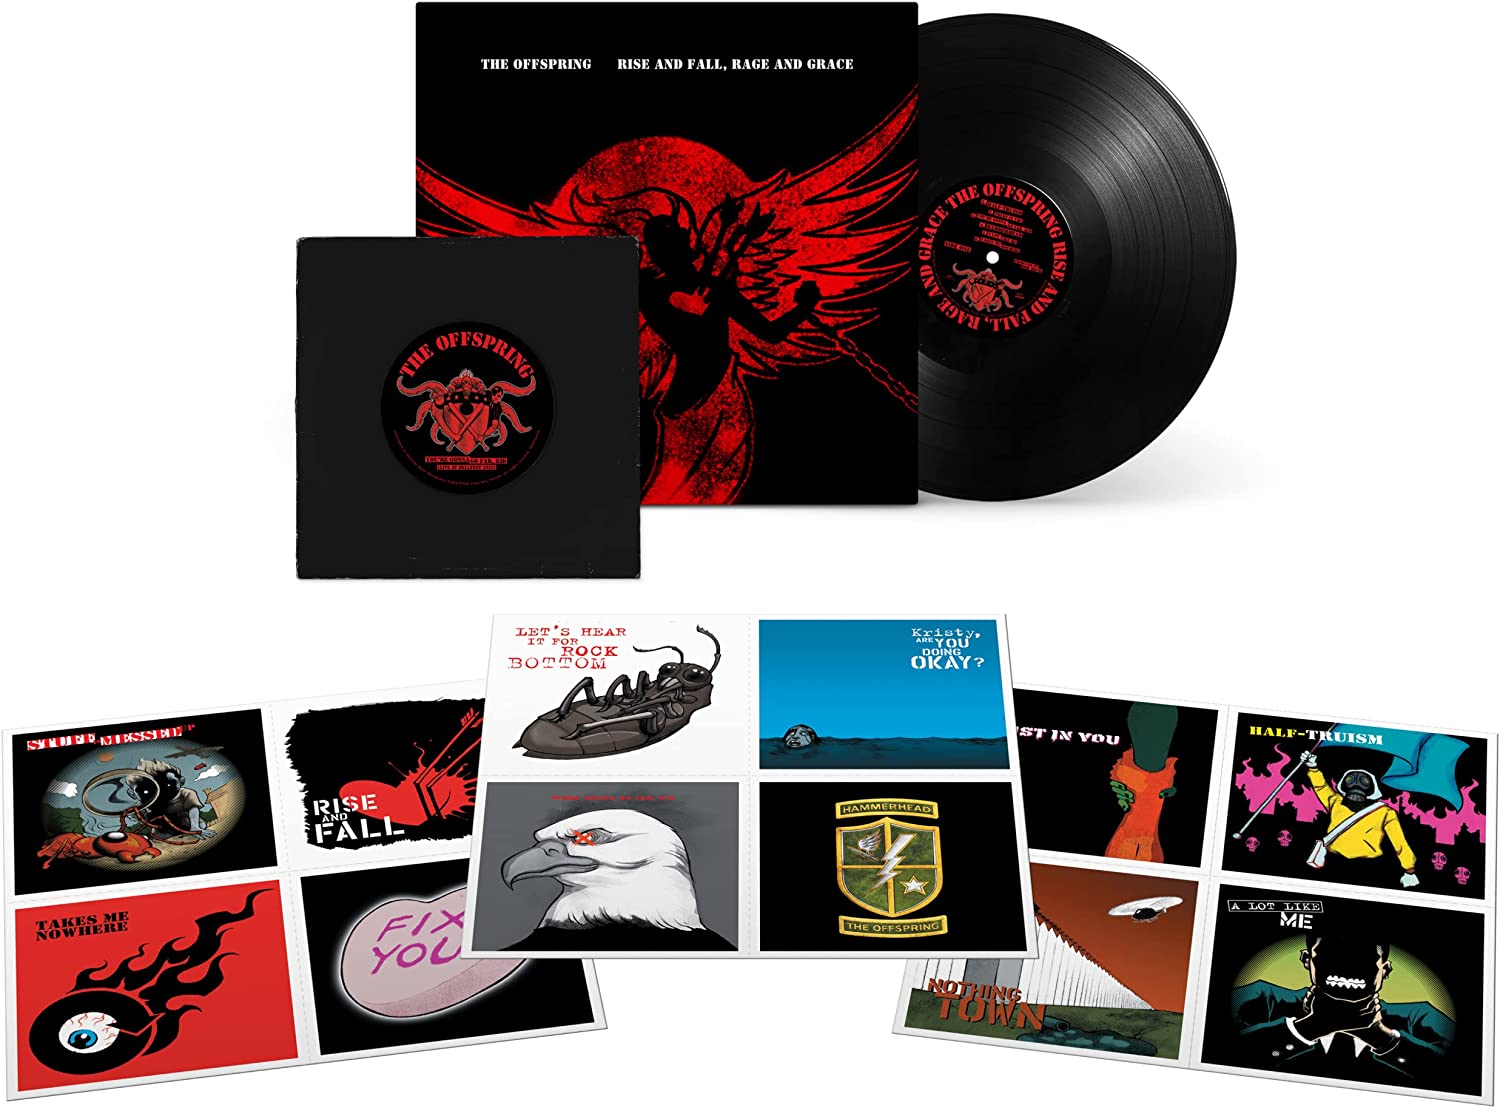 THE OFFSPRING - Rise And Fall, Rage and Grace - 15th Anniversary Edition (w/ Art Lithos for each song) - LP + Bonus 7" - Vinyl